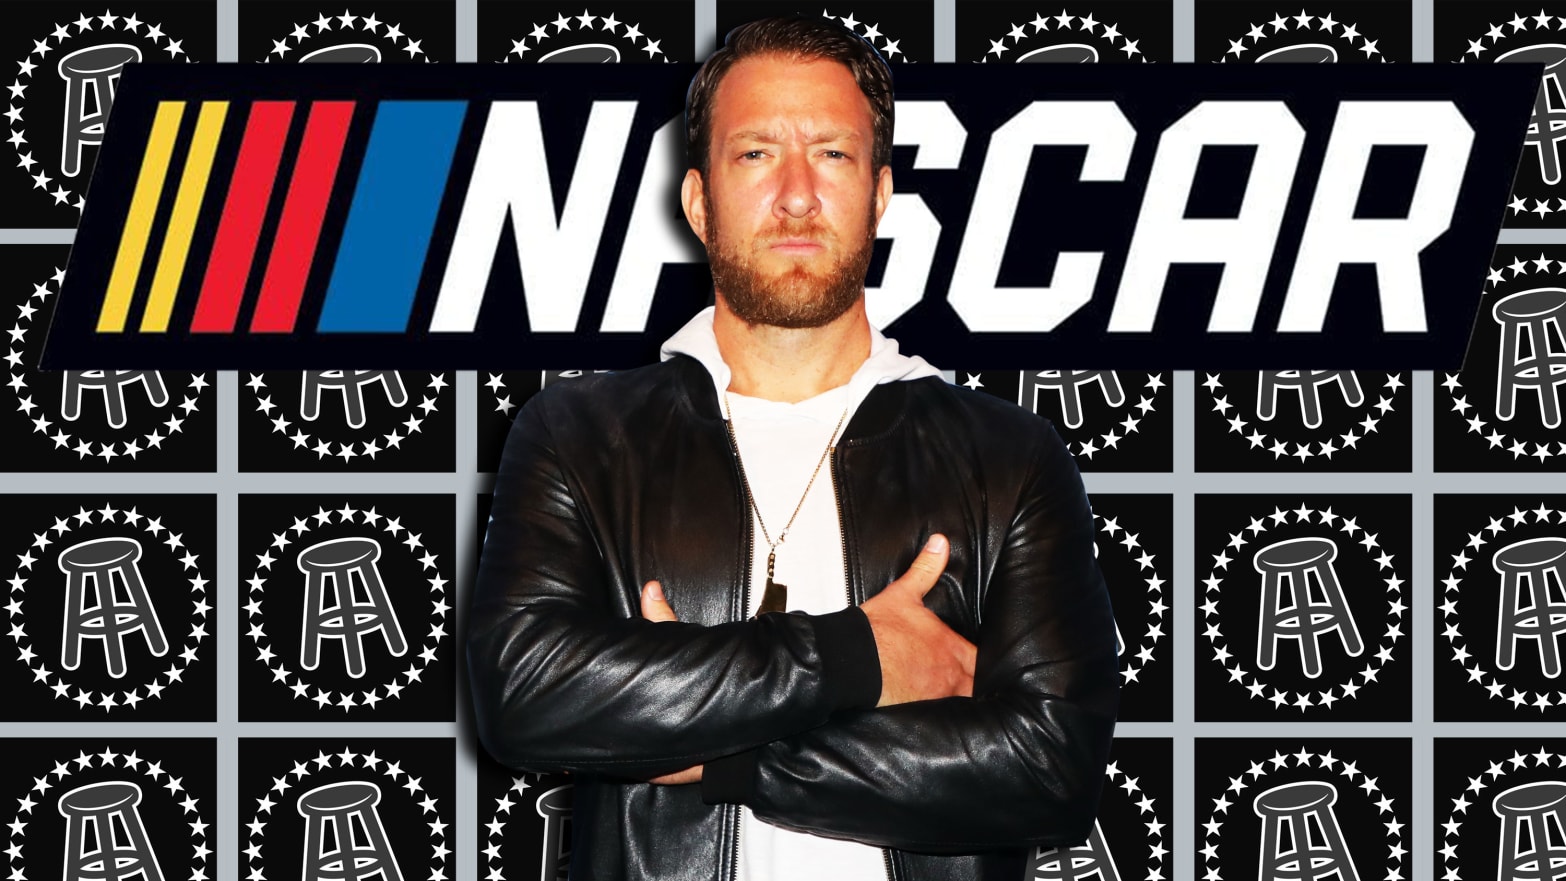 Barstool Sports Goons Follow Founder Dave Portnoy’s Order to ‘Attack